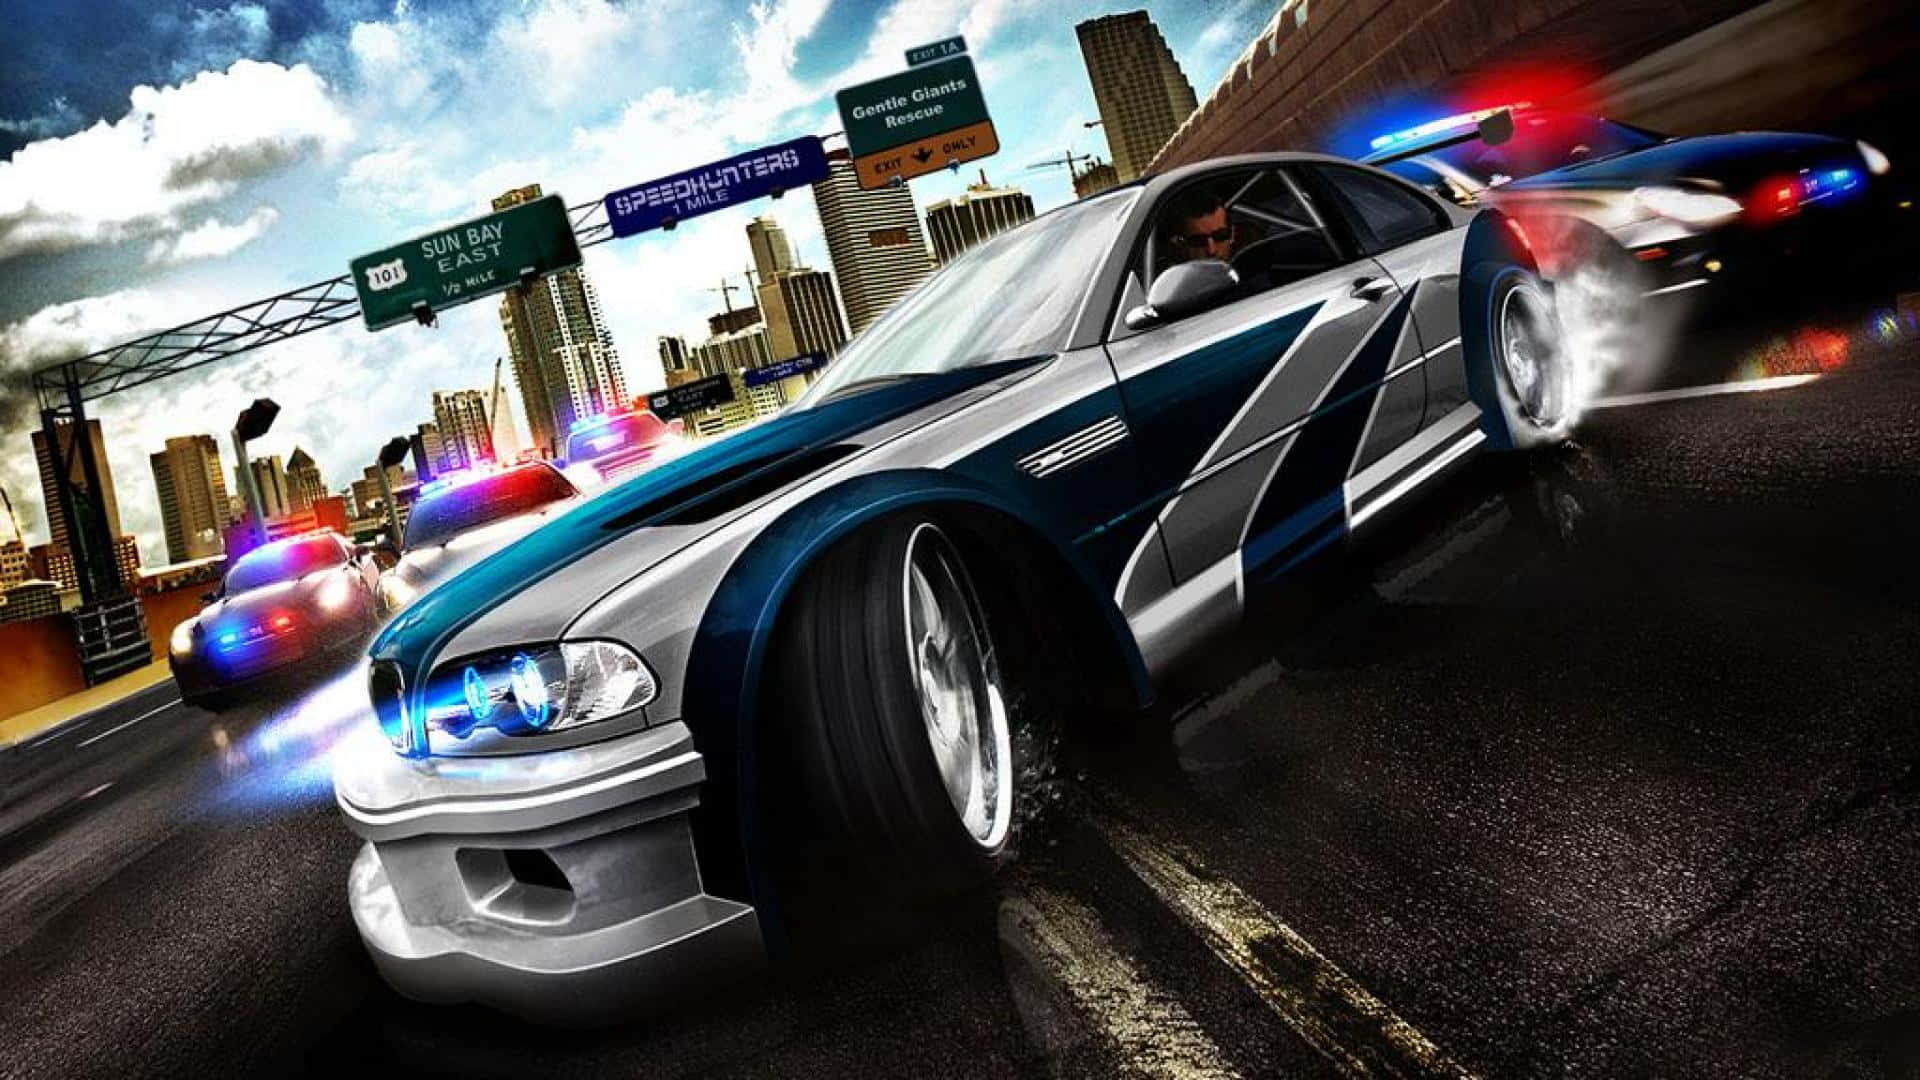 High-Octane Need for Speed Action Wallpaper